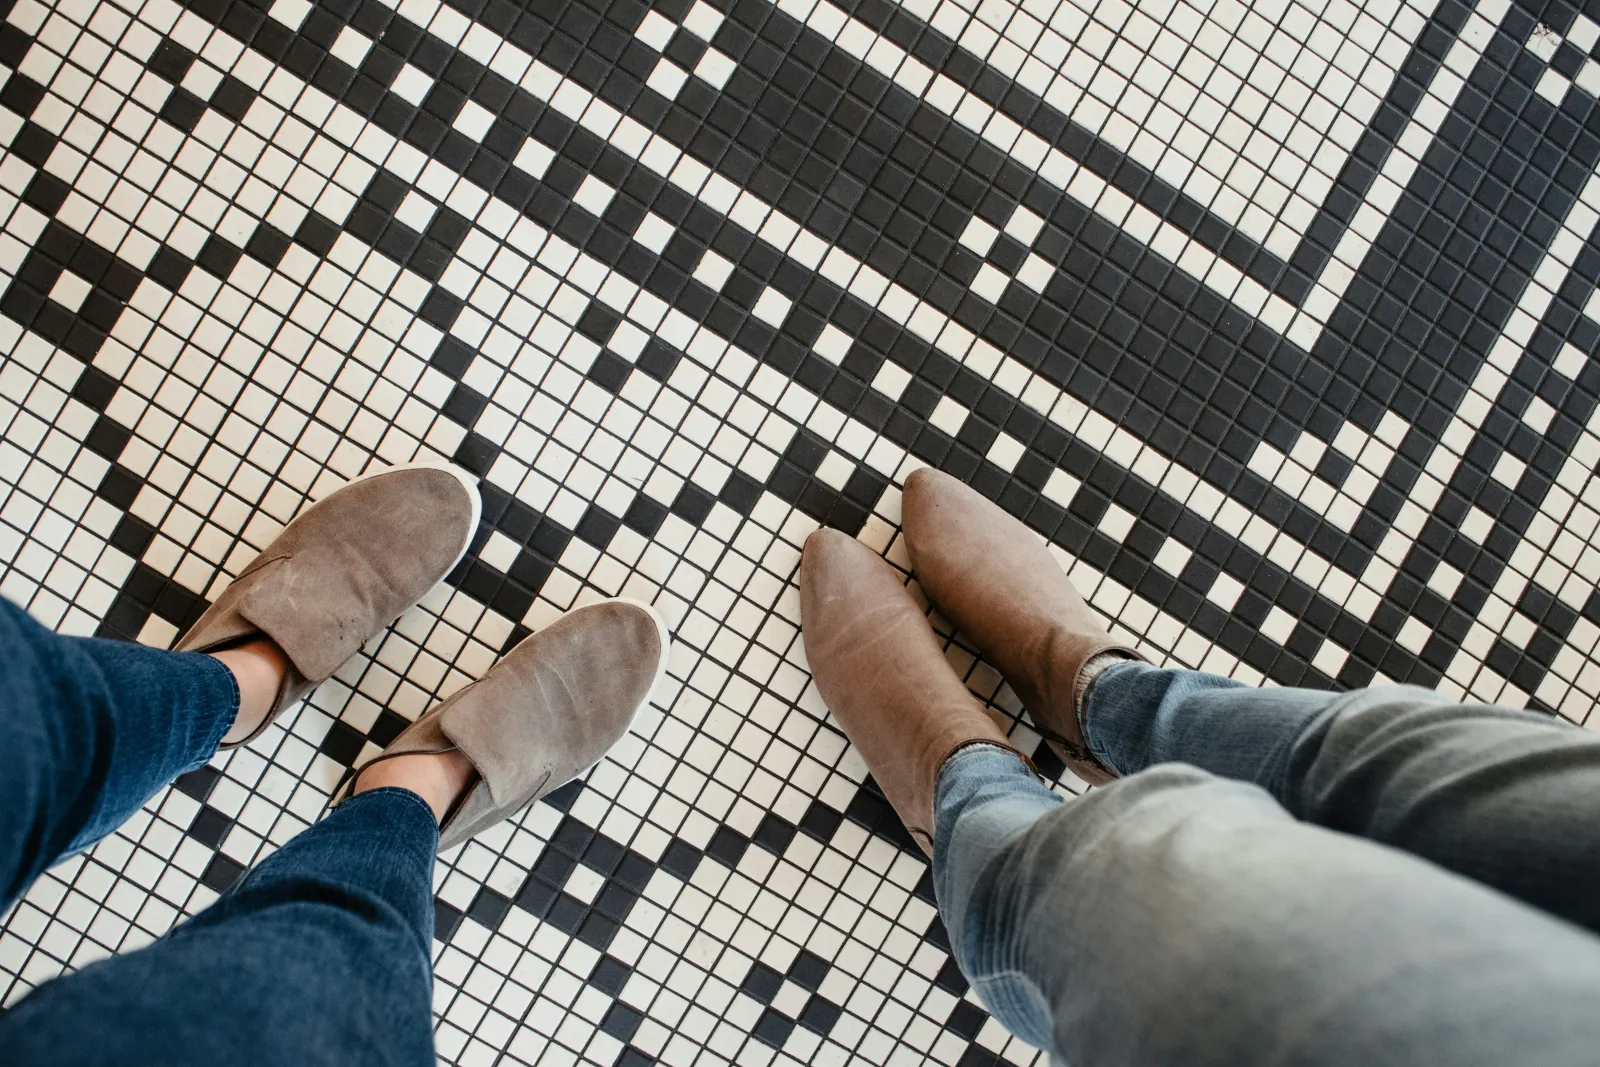 two pairs of feet and shoes standing on a black and white tile floor